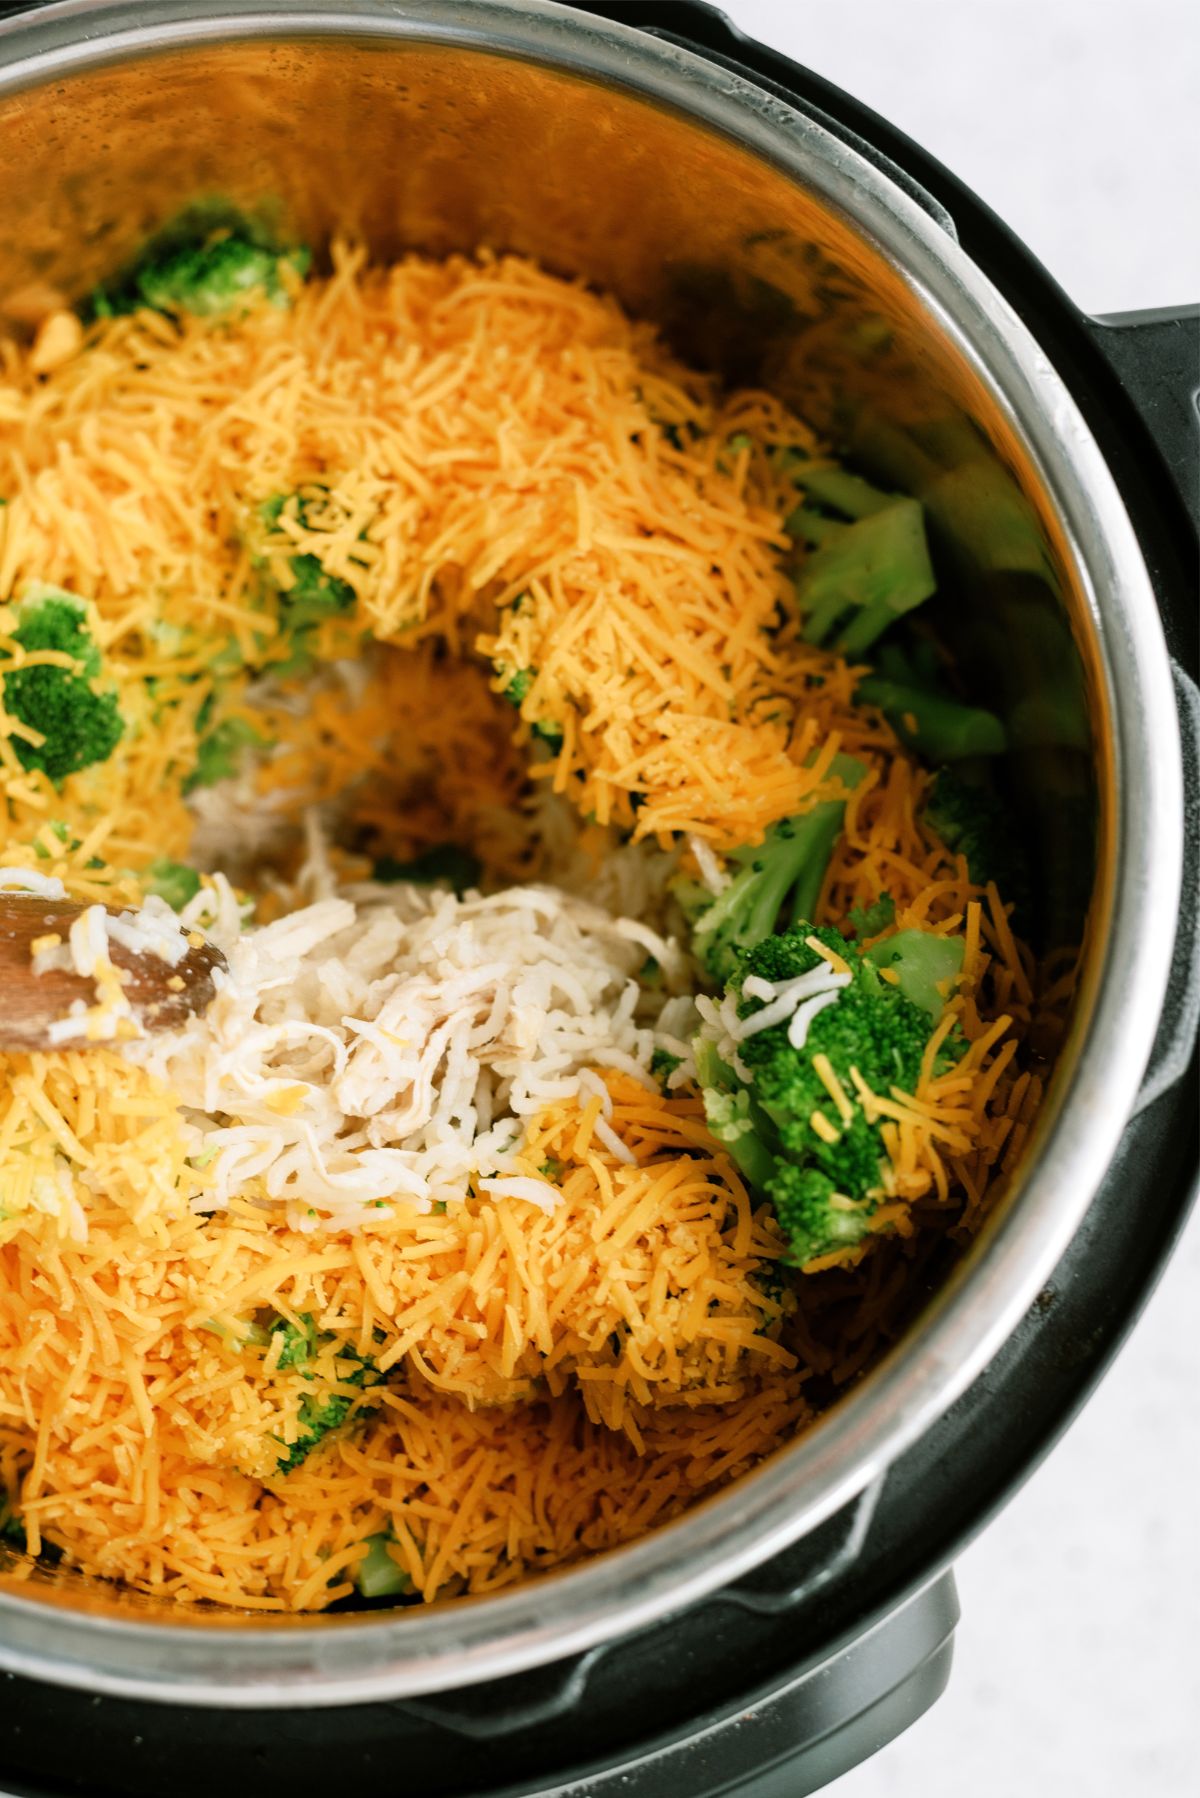 Shredded cheese on top of chicken, rice and broccoli in the Instant Pot